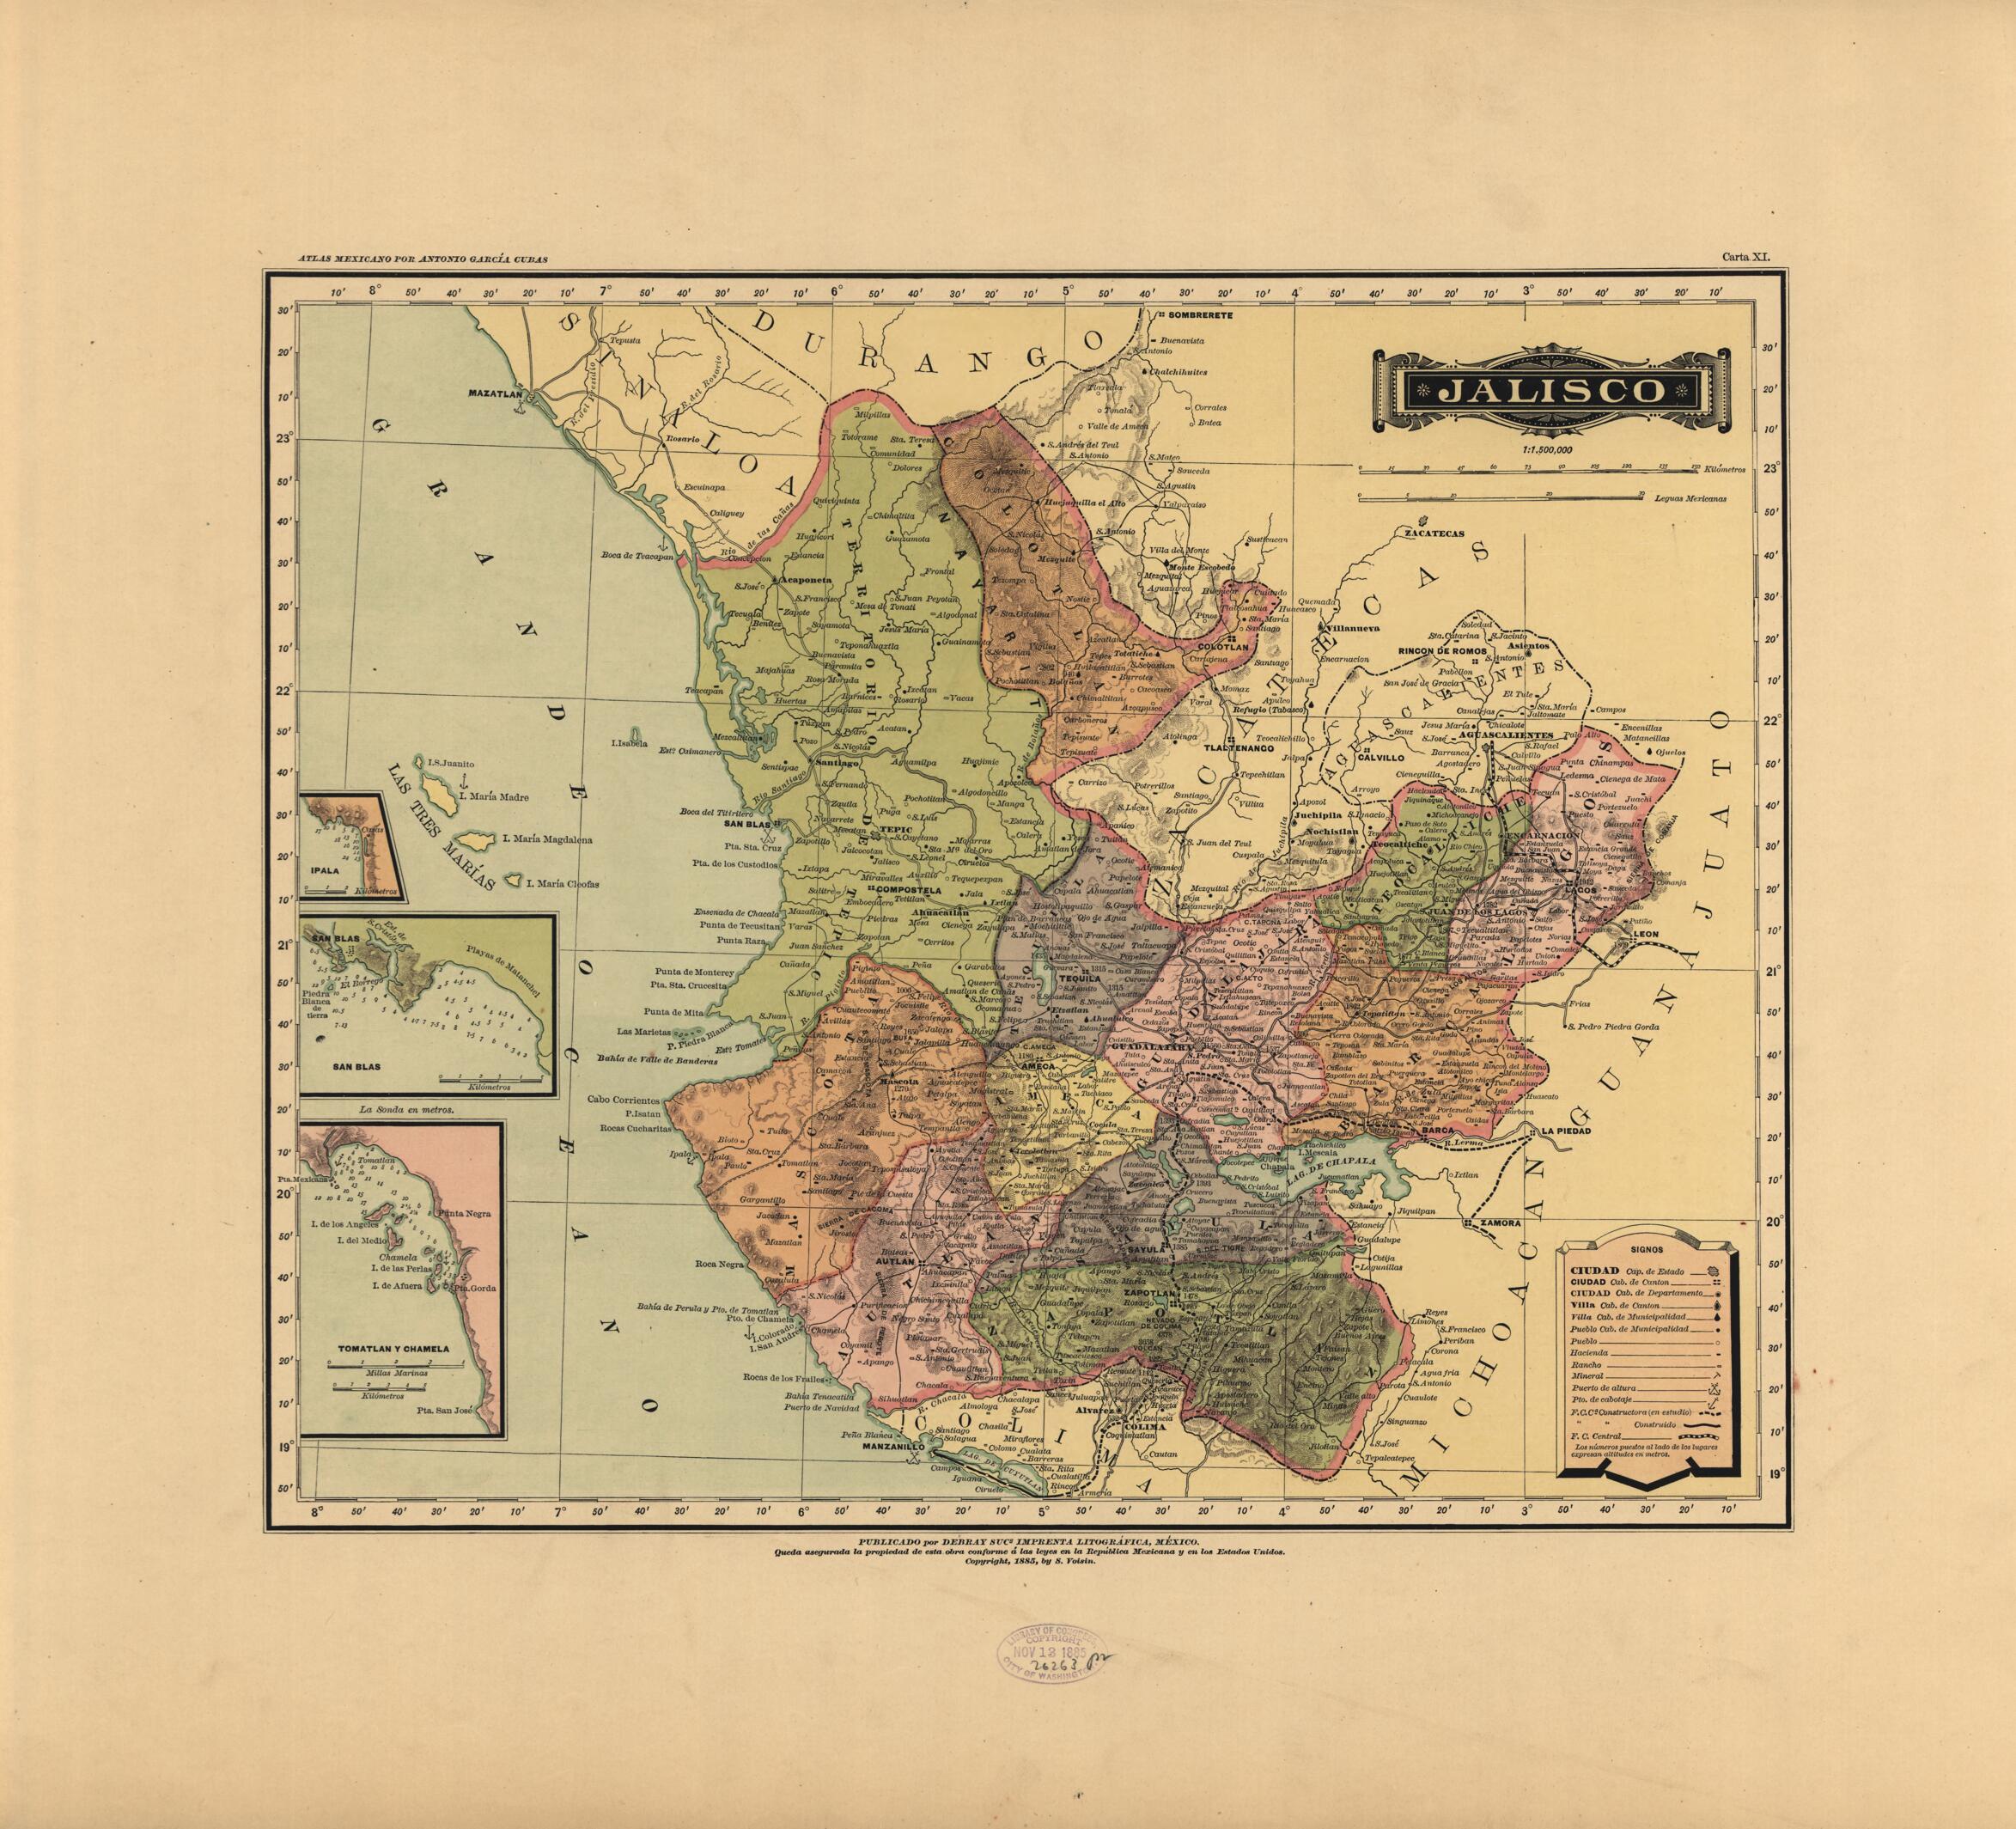 This old map of Jalisco from Atlas Mexicano. from 1884 was created by Antonio García Cubas in 1884